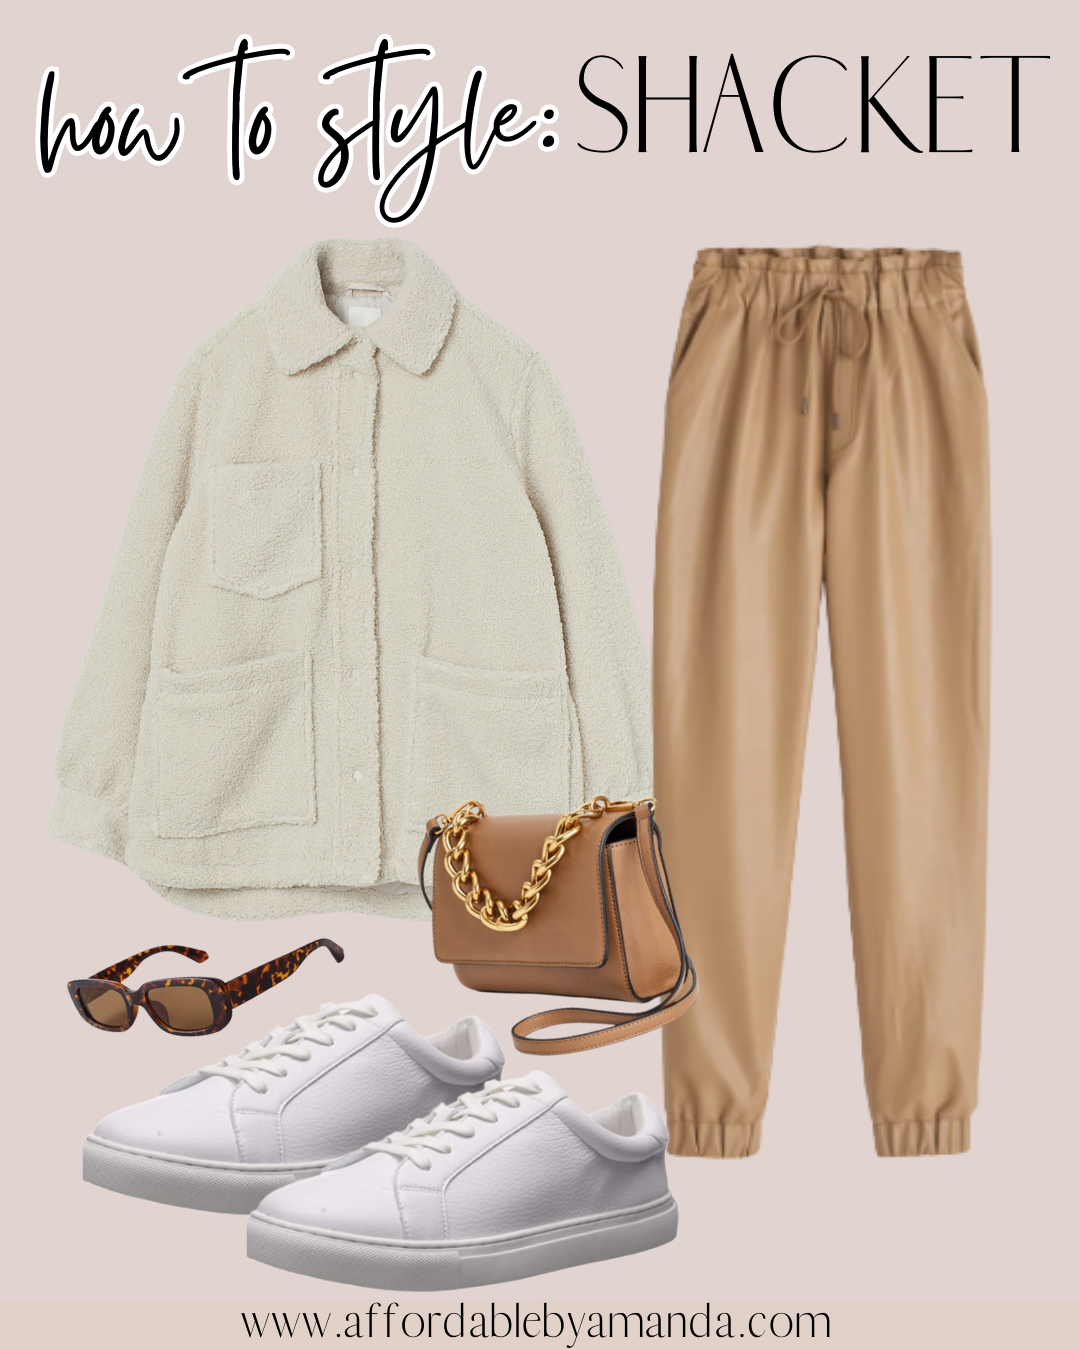 Best Shackets and How to Style Them | Affordable by Amanda | Oversized faux shearling shirt jacket, Abercrombie vegan joggers, white sneakers